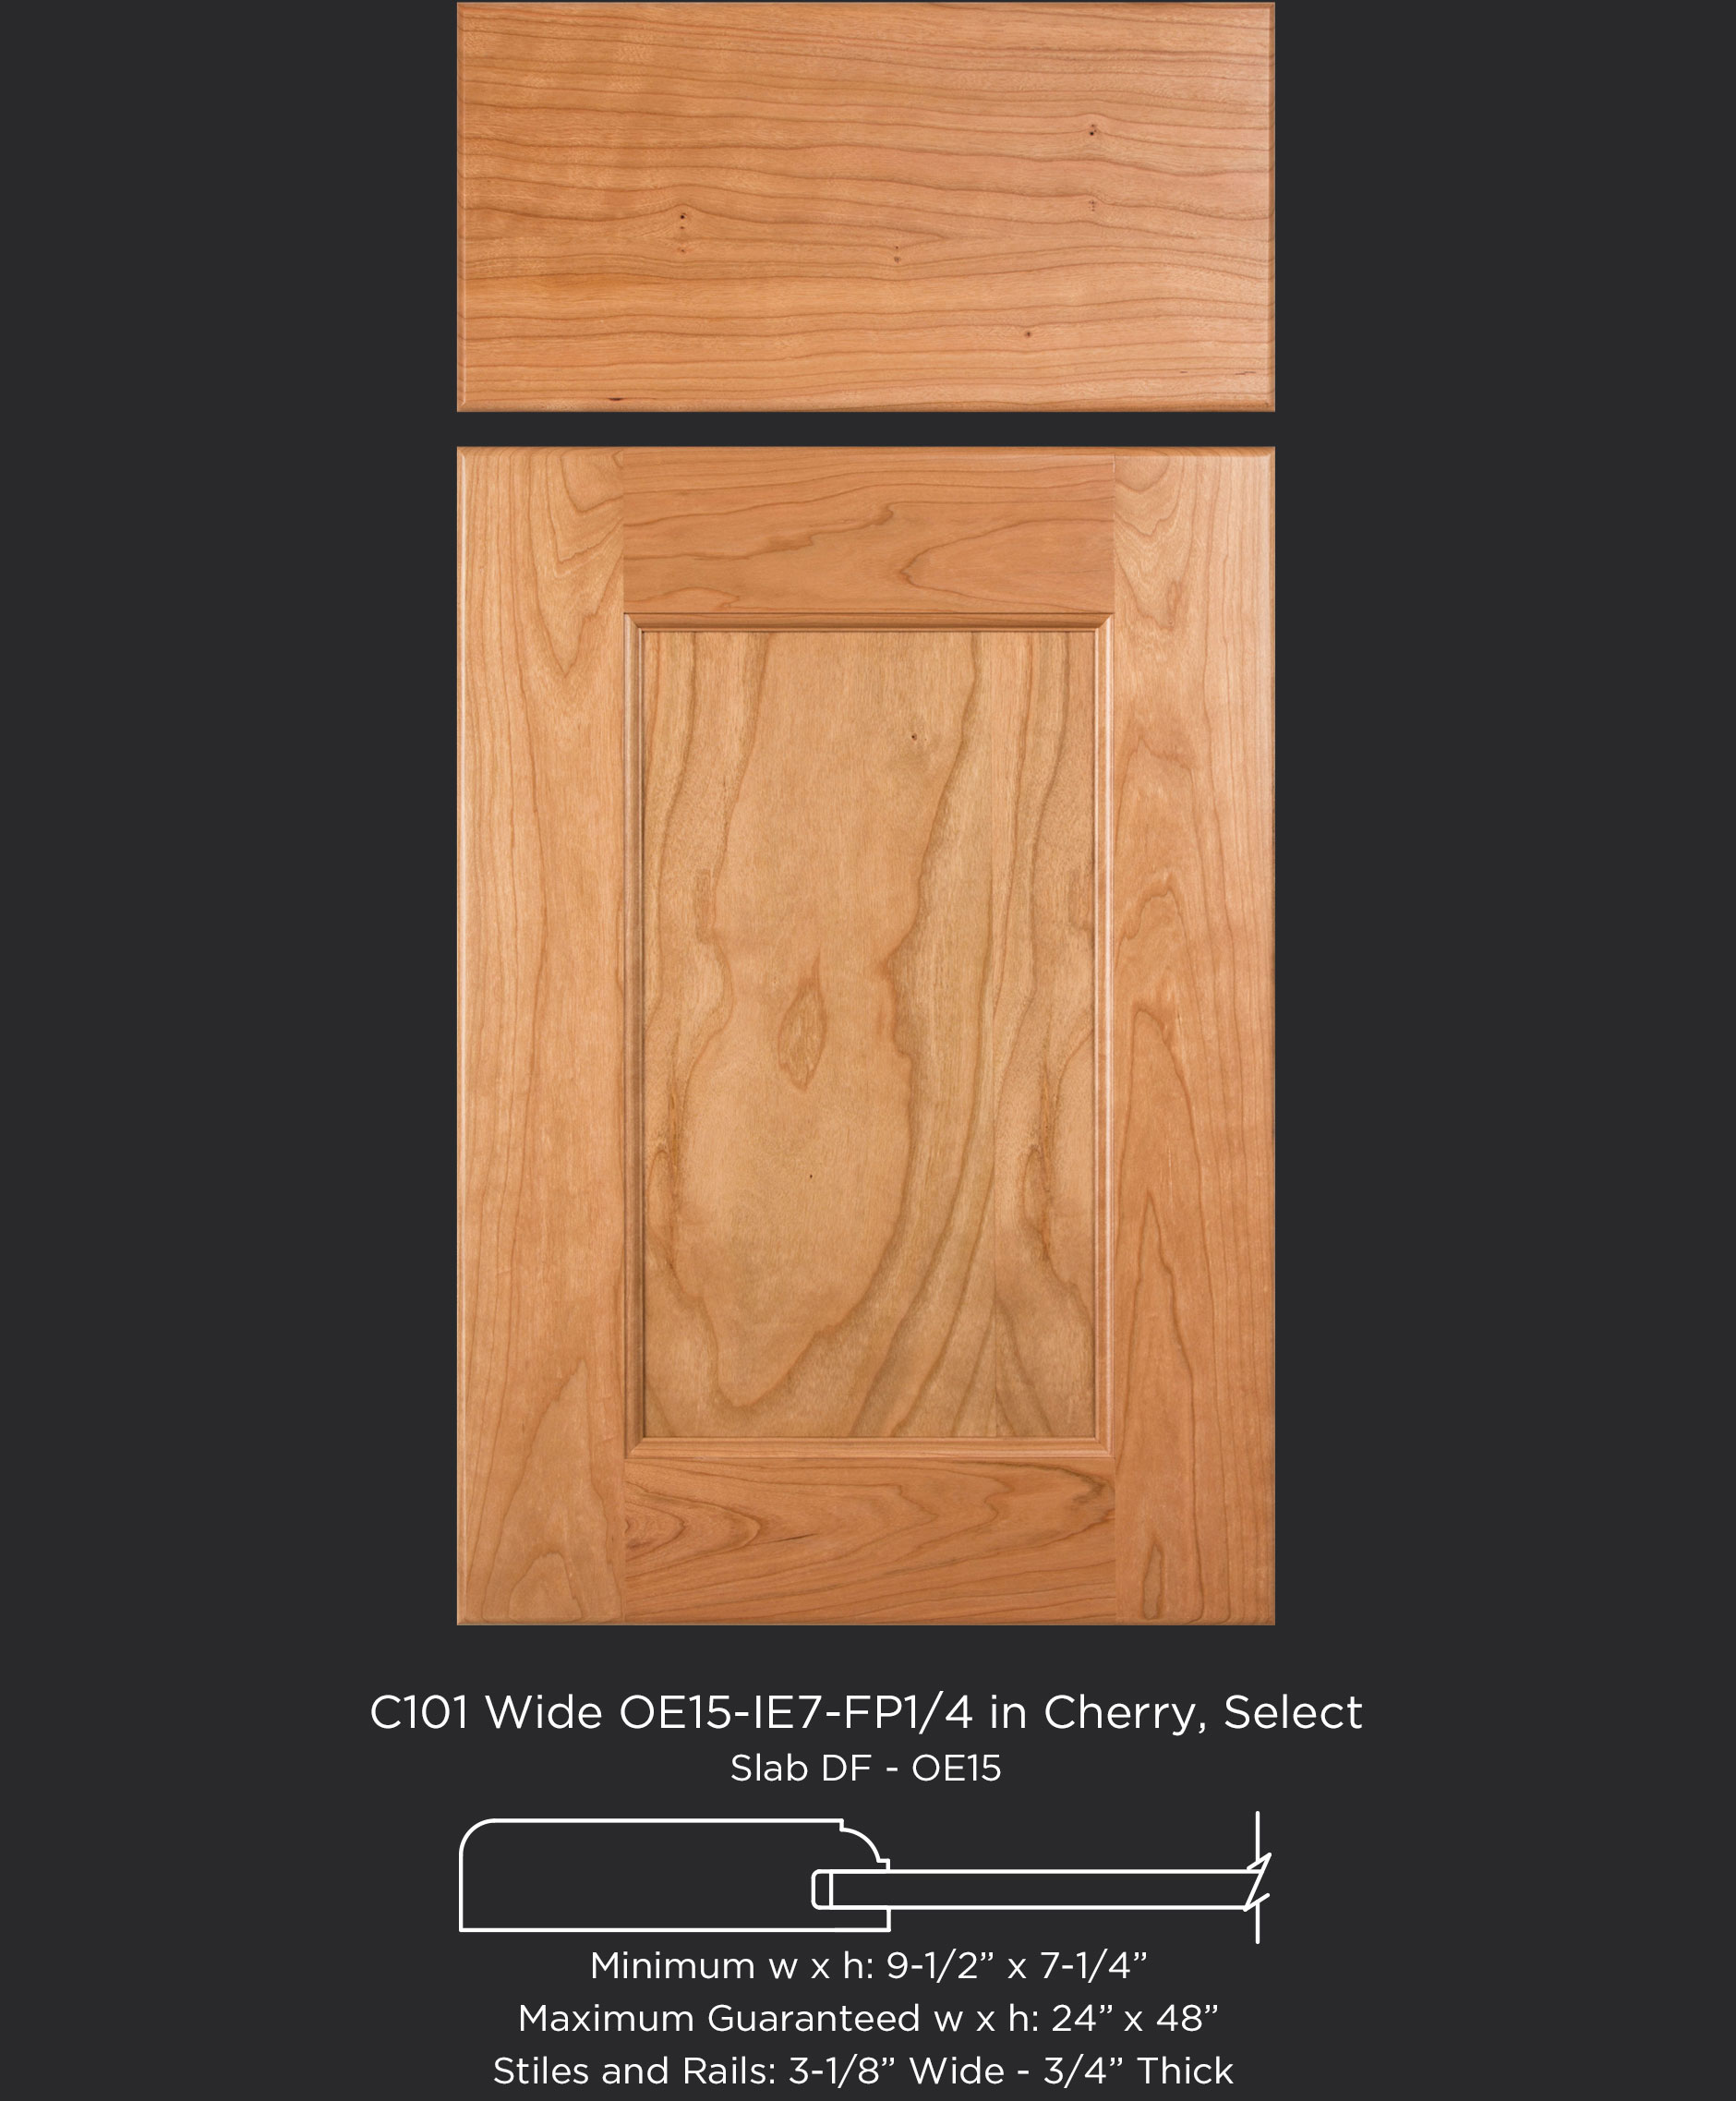 Cope and Stick Cabinet Door C101 Wide OE15-IE7-FP1/4 Cherry, Select